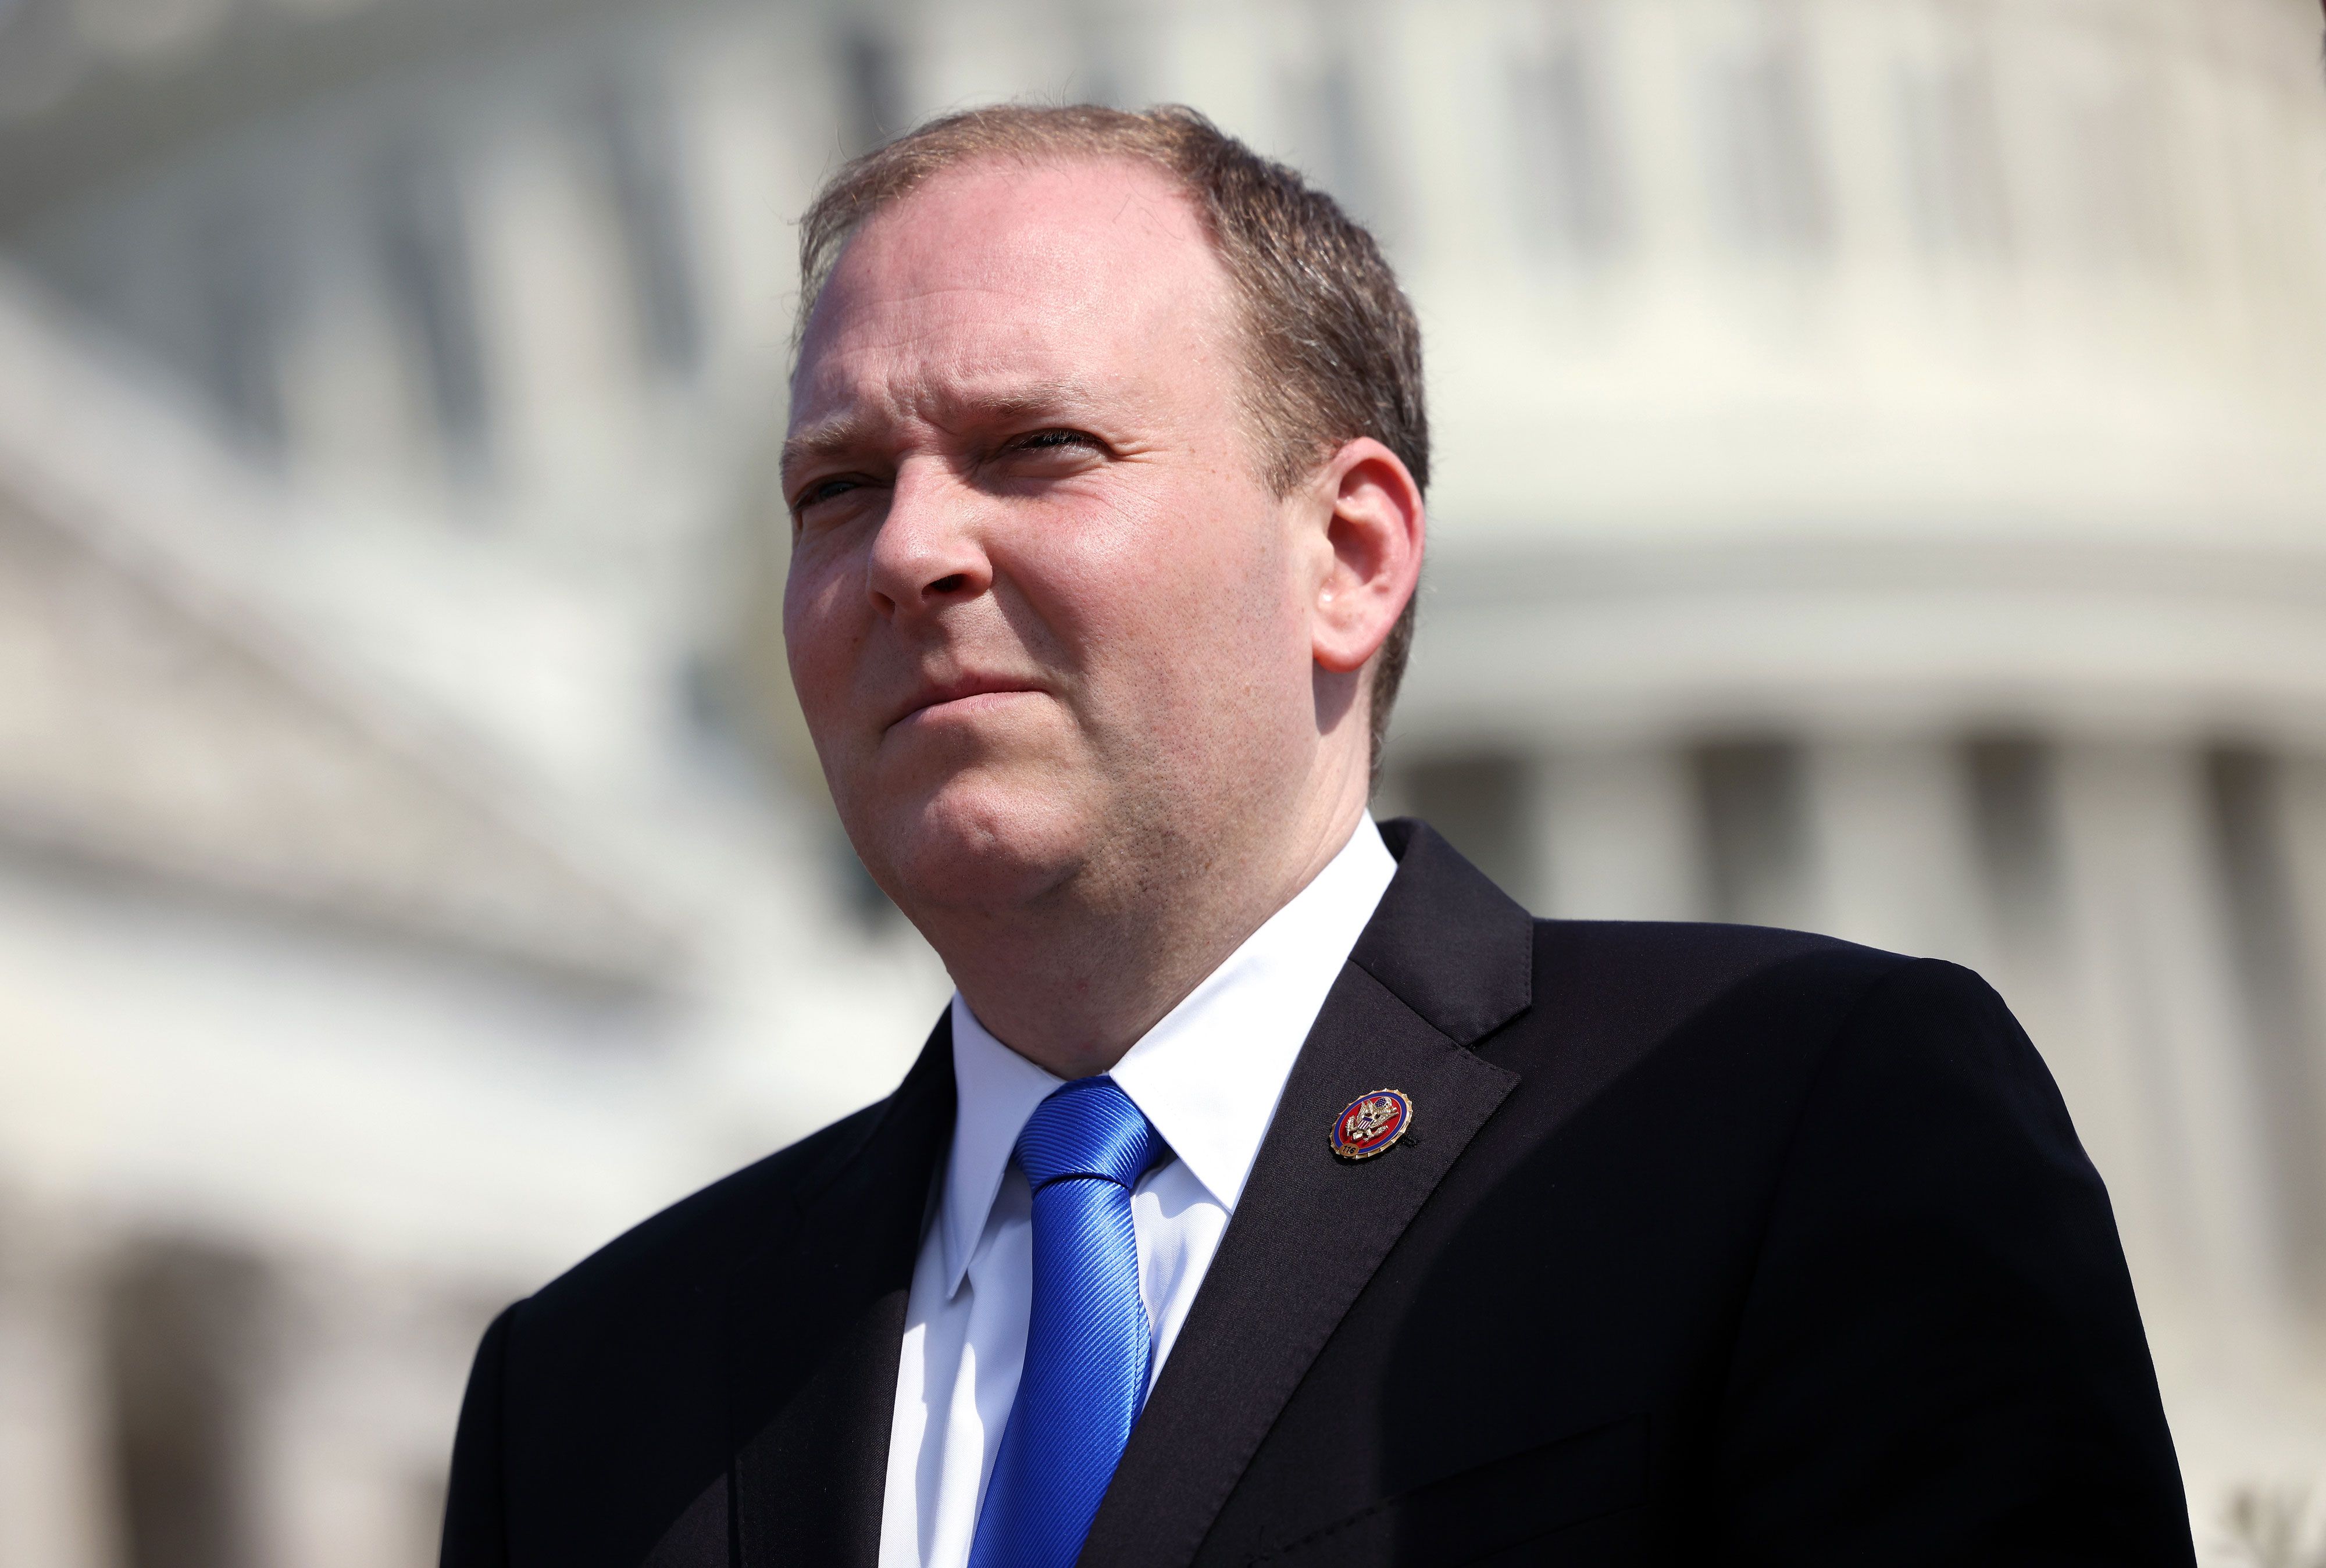 Rep. Lee Zeldin Attacked on Stage During Campaign Speech